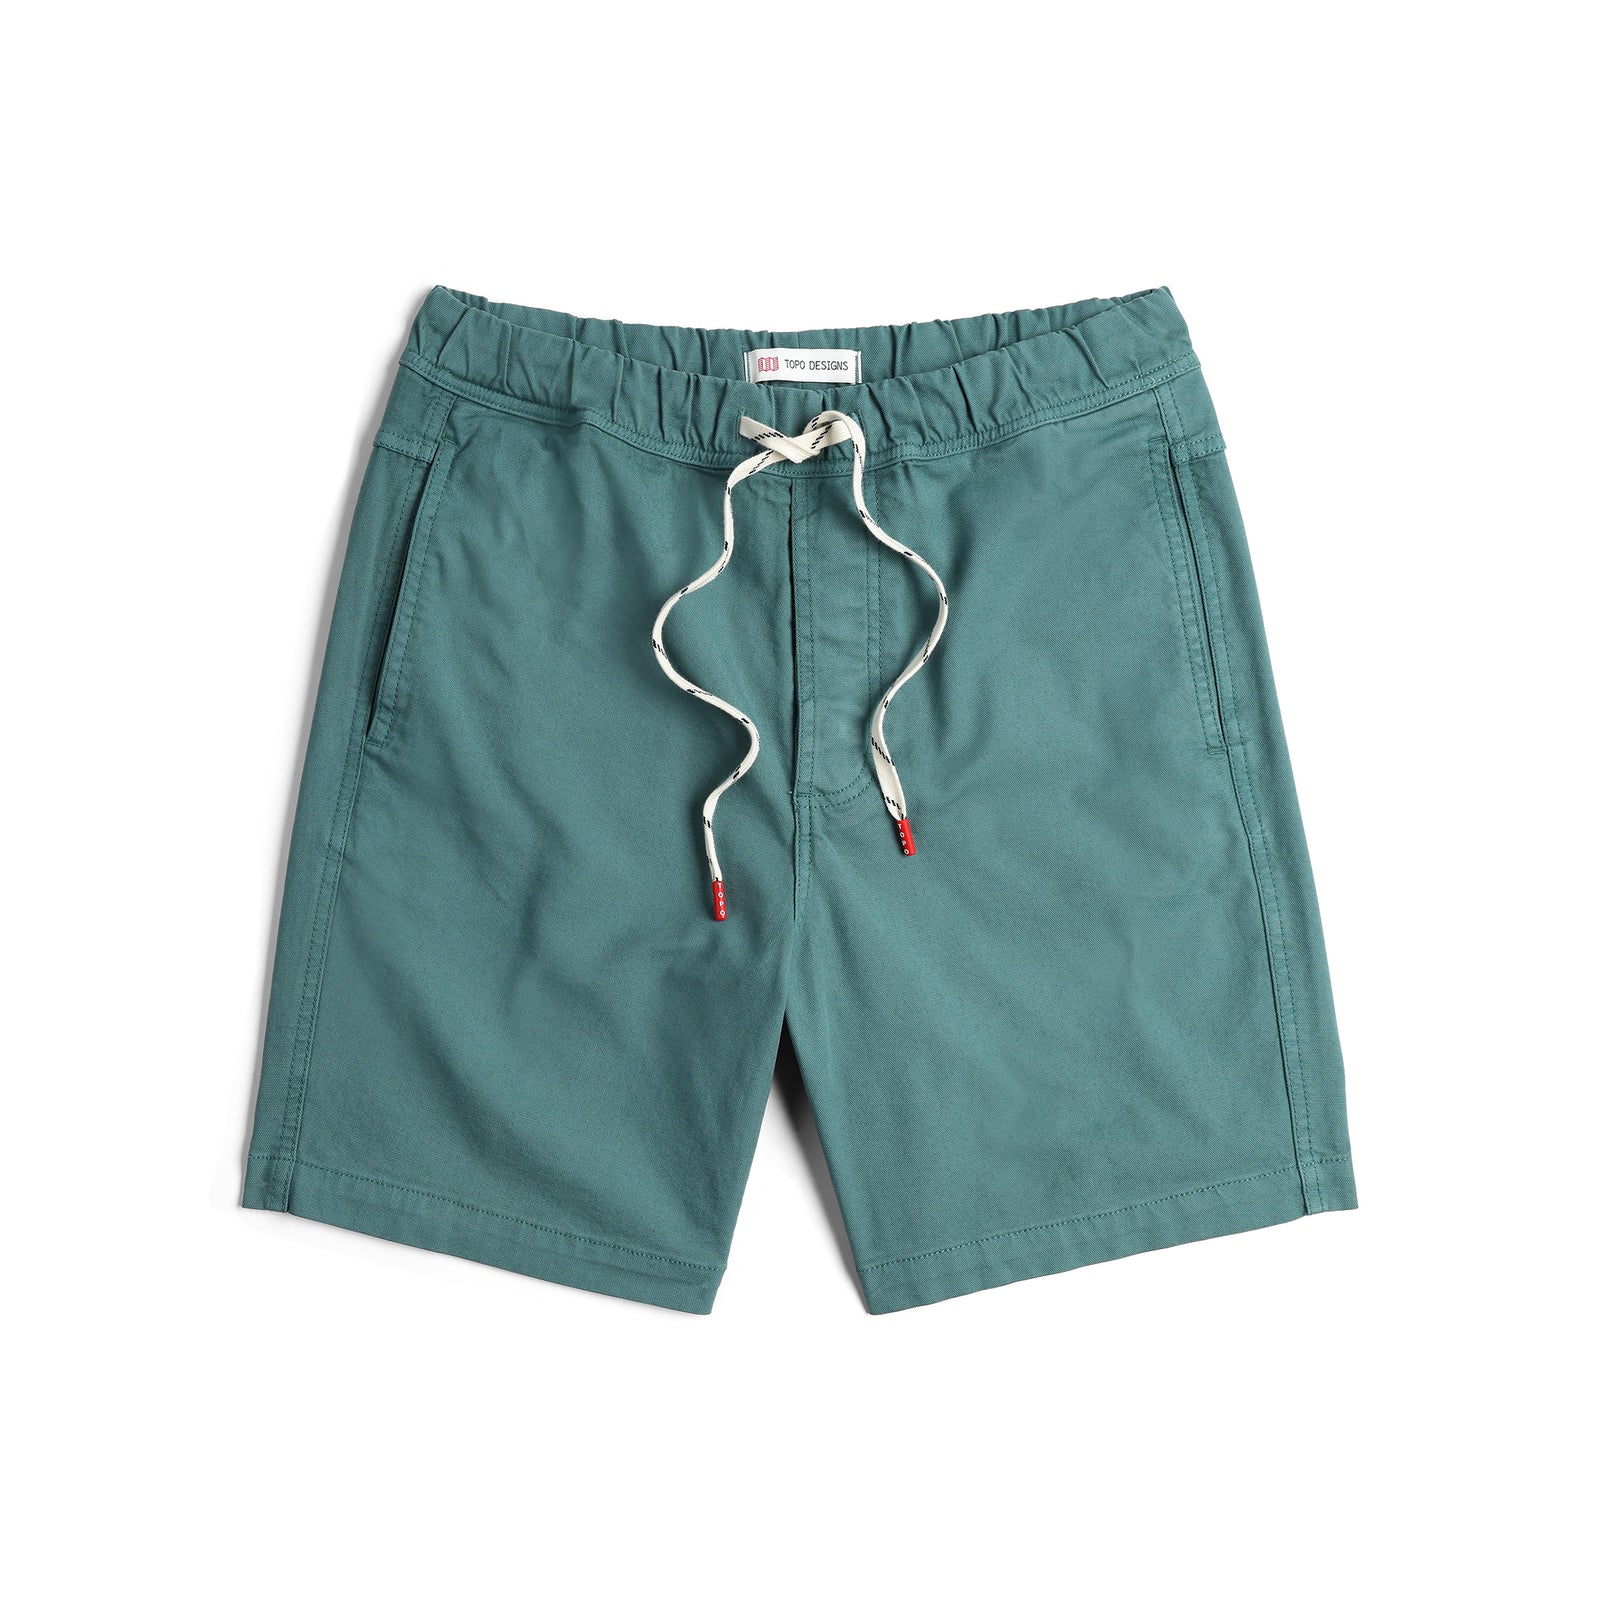 Front View of Topo Designs Dirt Shorts - Men's in "Sea Pine"